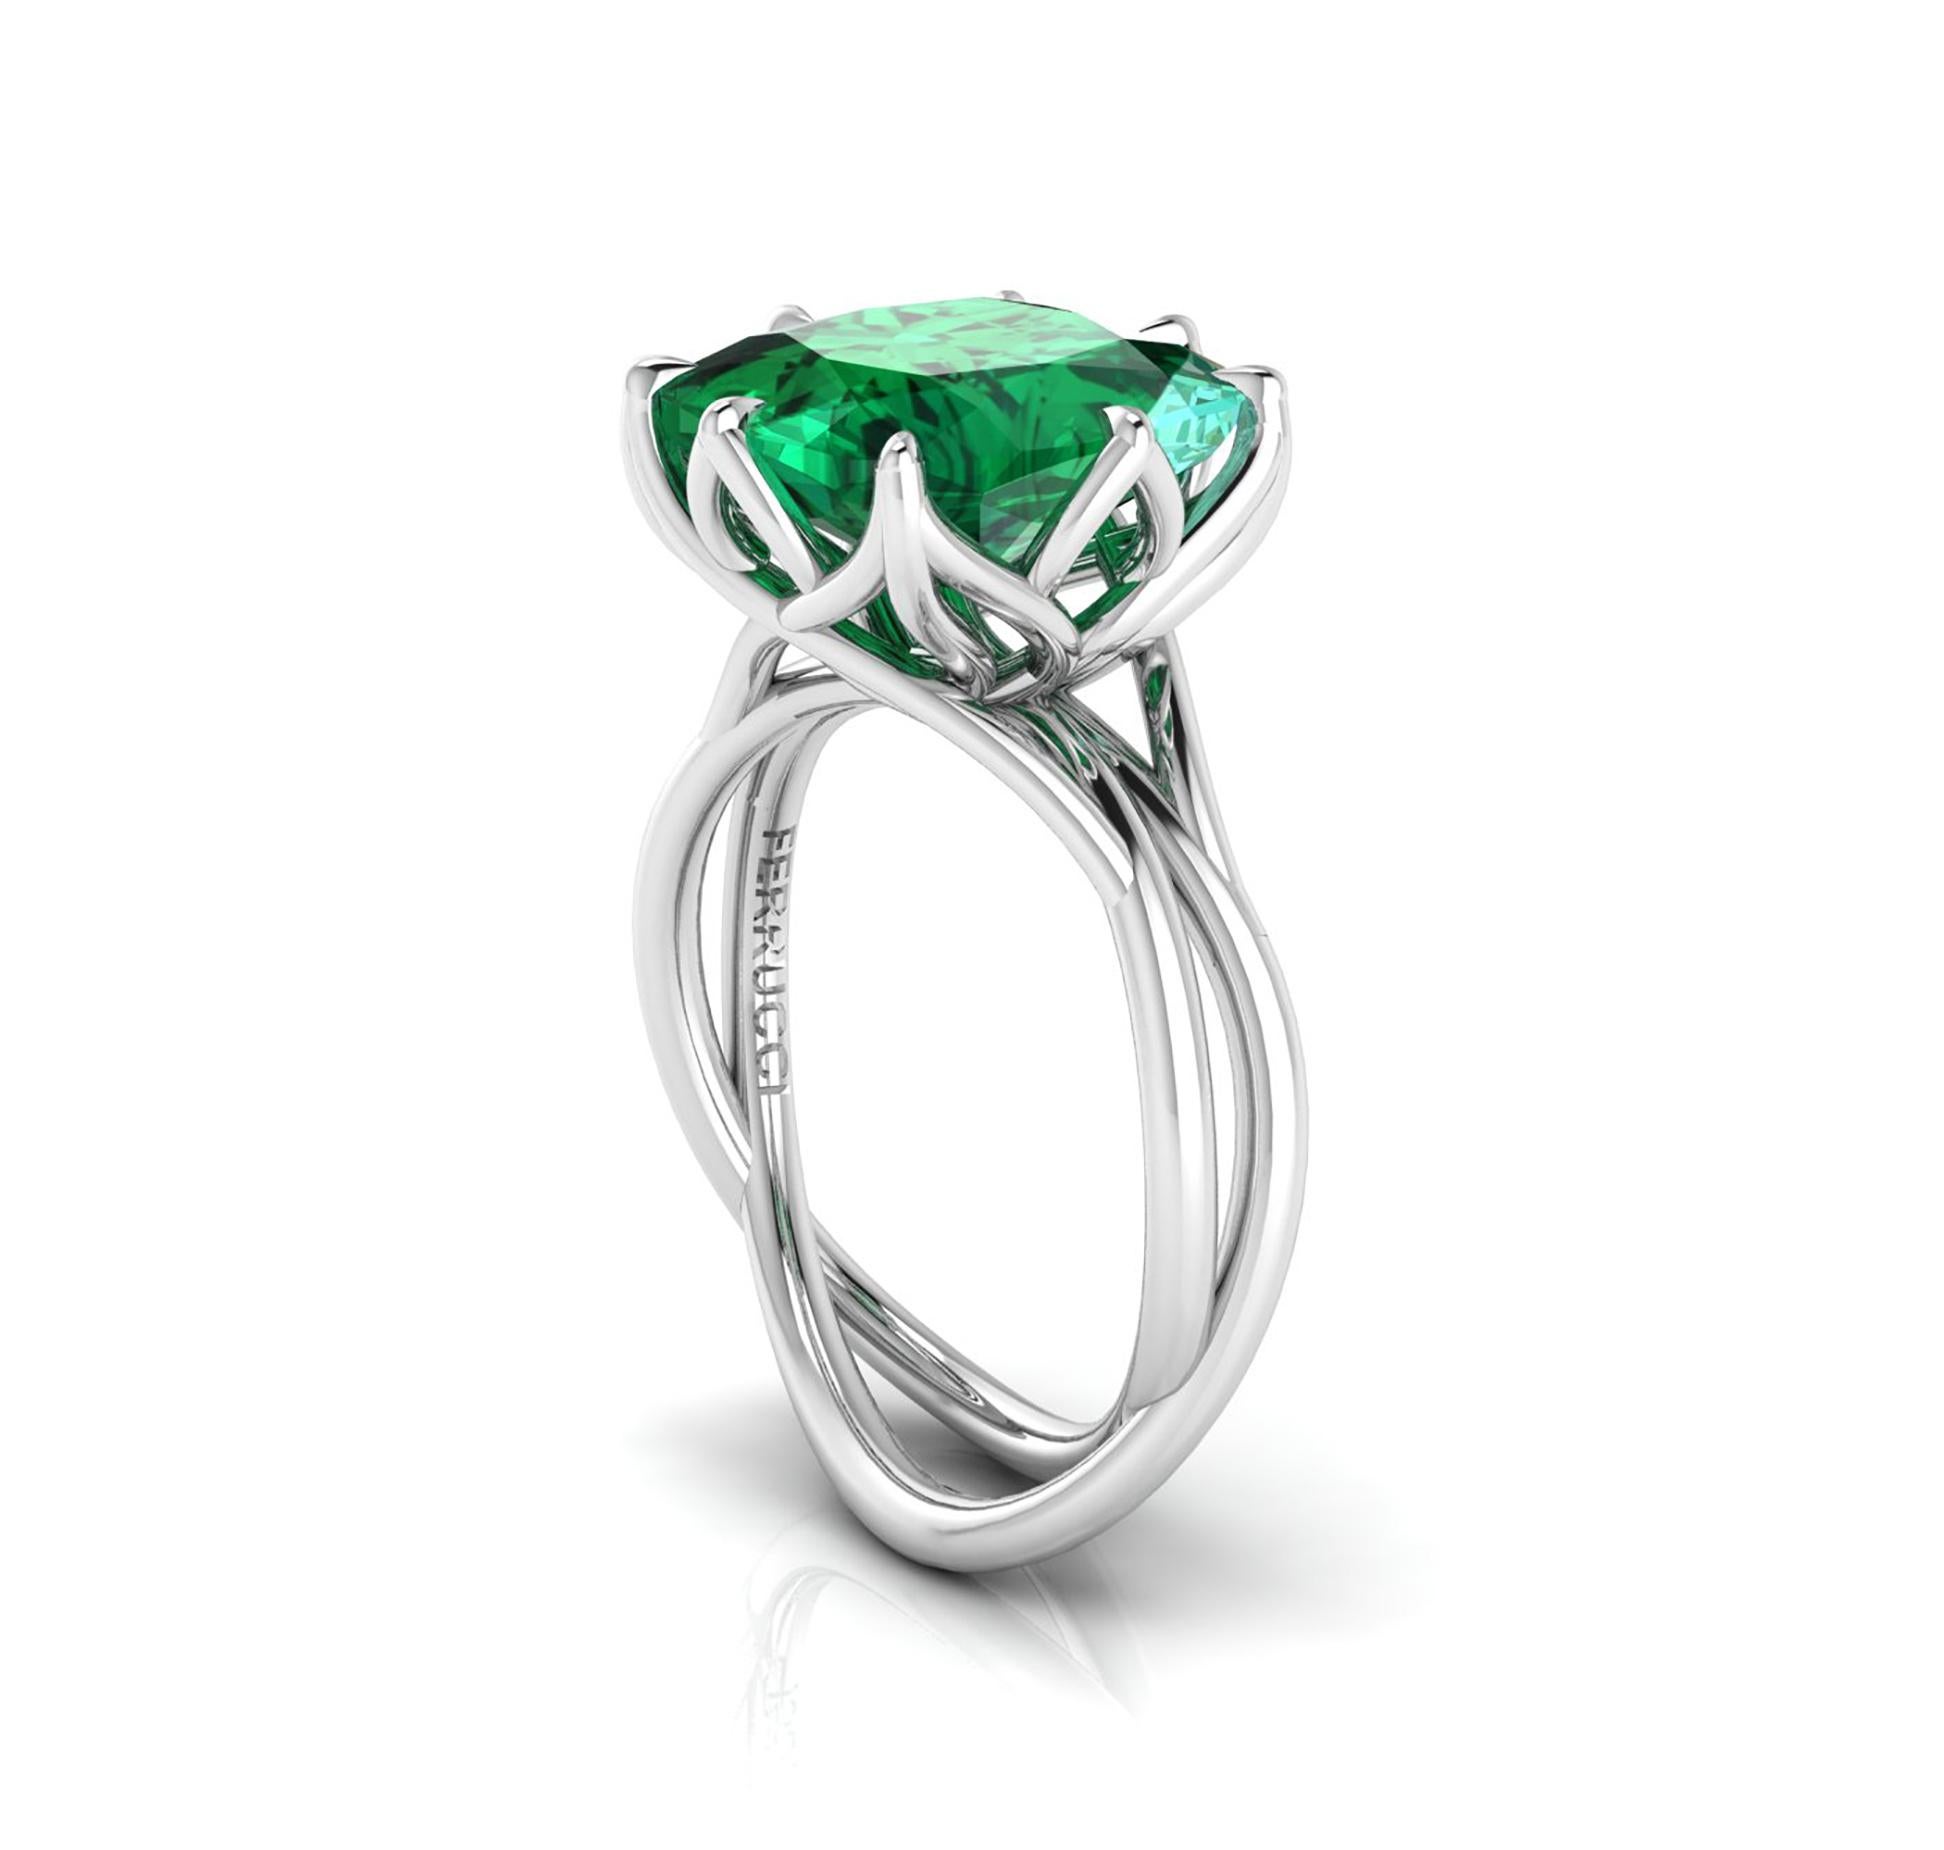  5.42 deep green natural Emerald  GIA Certified, in a one of a kind, hand made Platinum 950, designed and conceived in New York City. A design that recall nature's vines and ever flowing life of exotic flowers, with a modern prospective. 
This ring